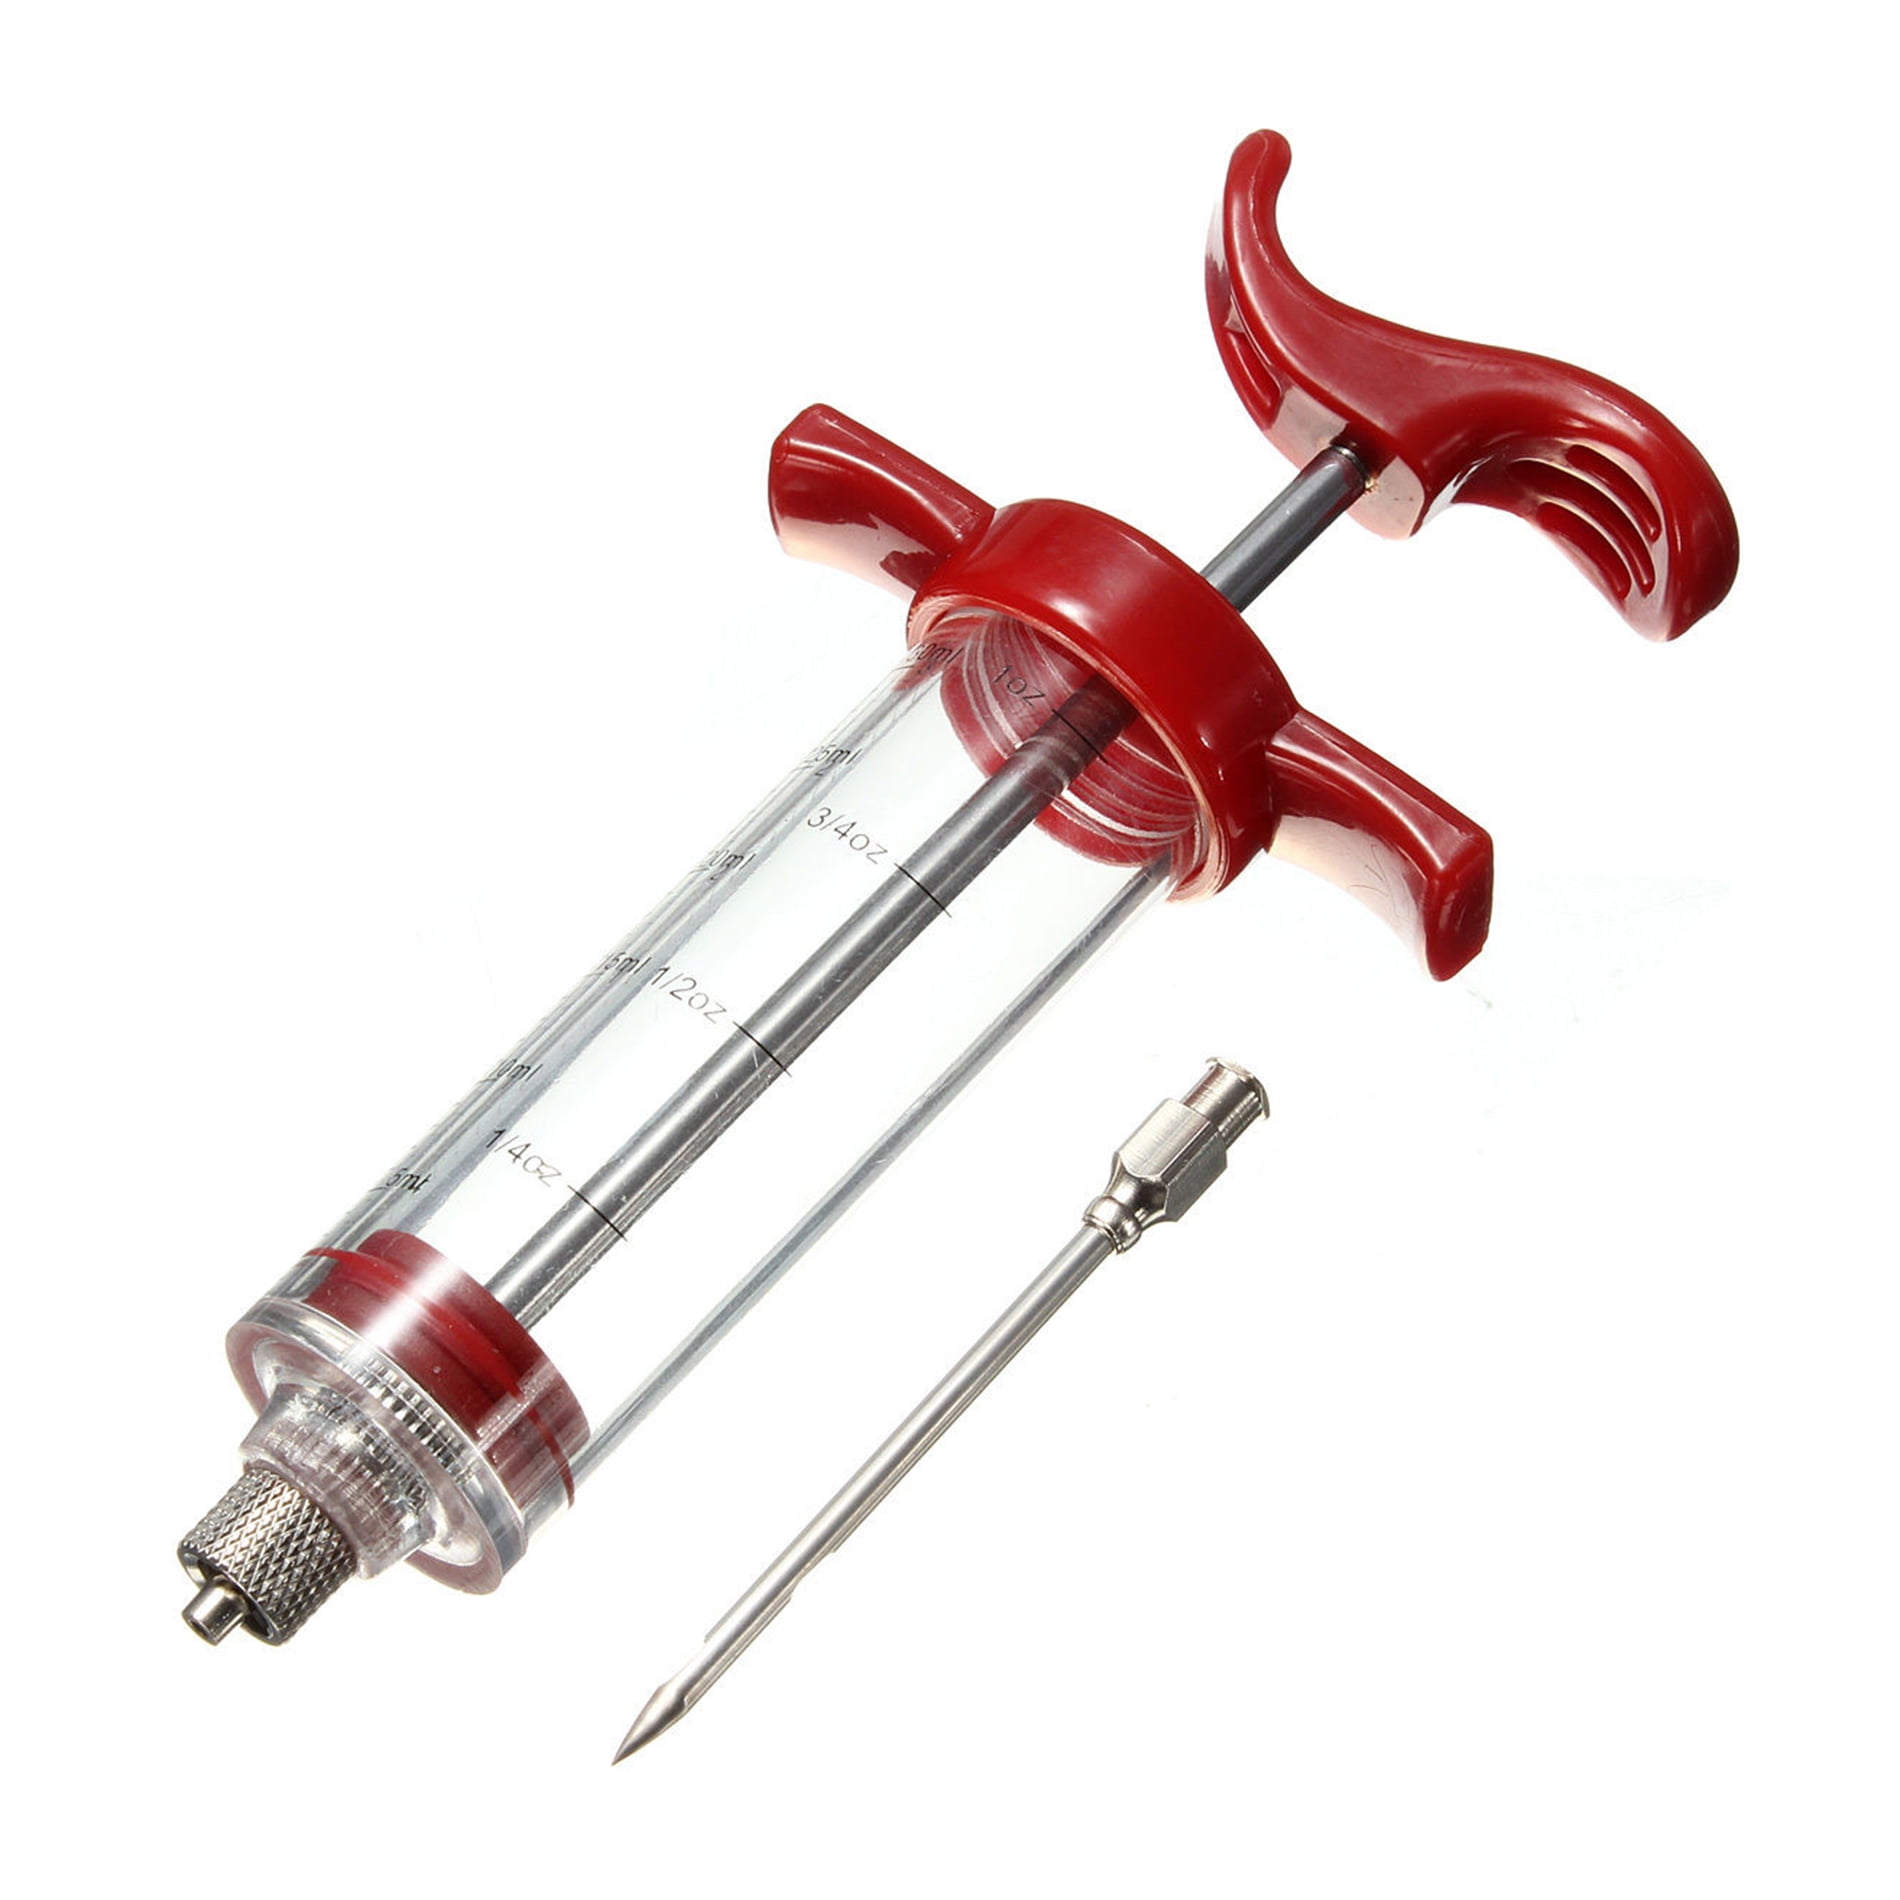 Heavy Duty Stainless Steel Marinade Injector Syringe for Meat, Flavor  Injection Kit for BBQ by KapStrom